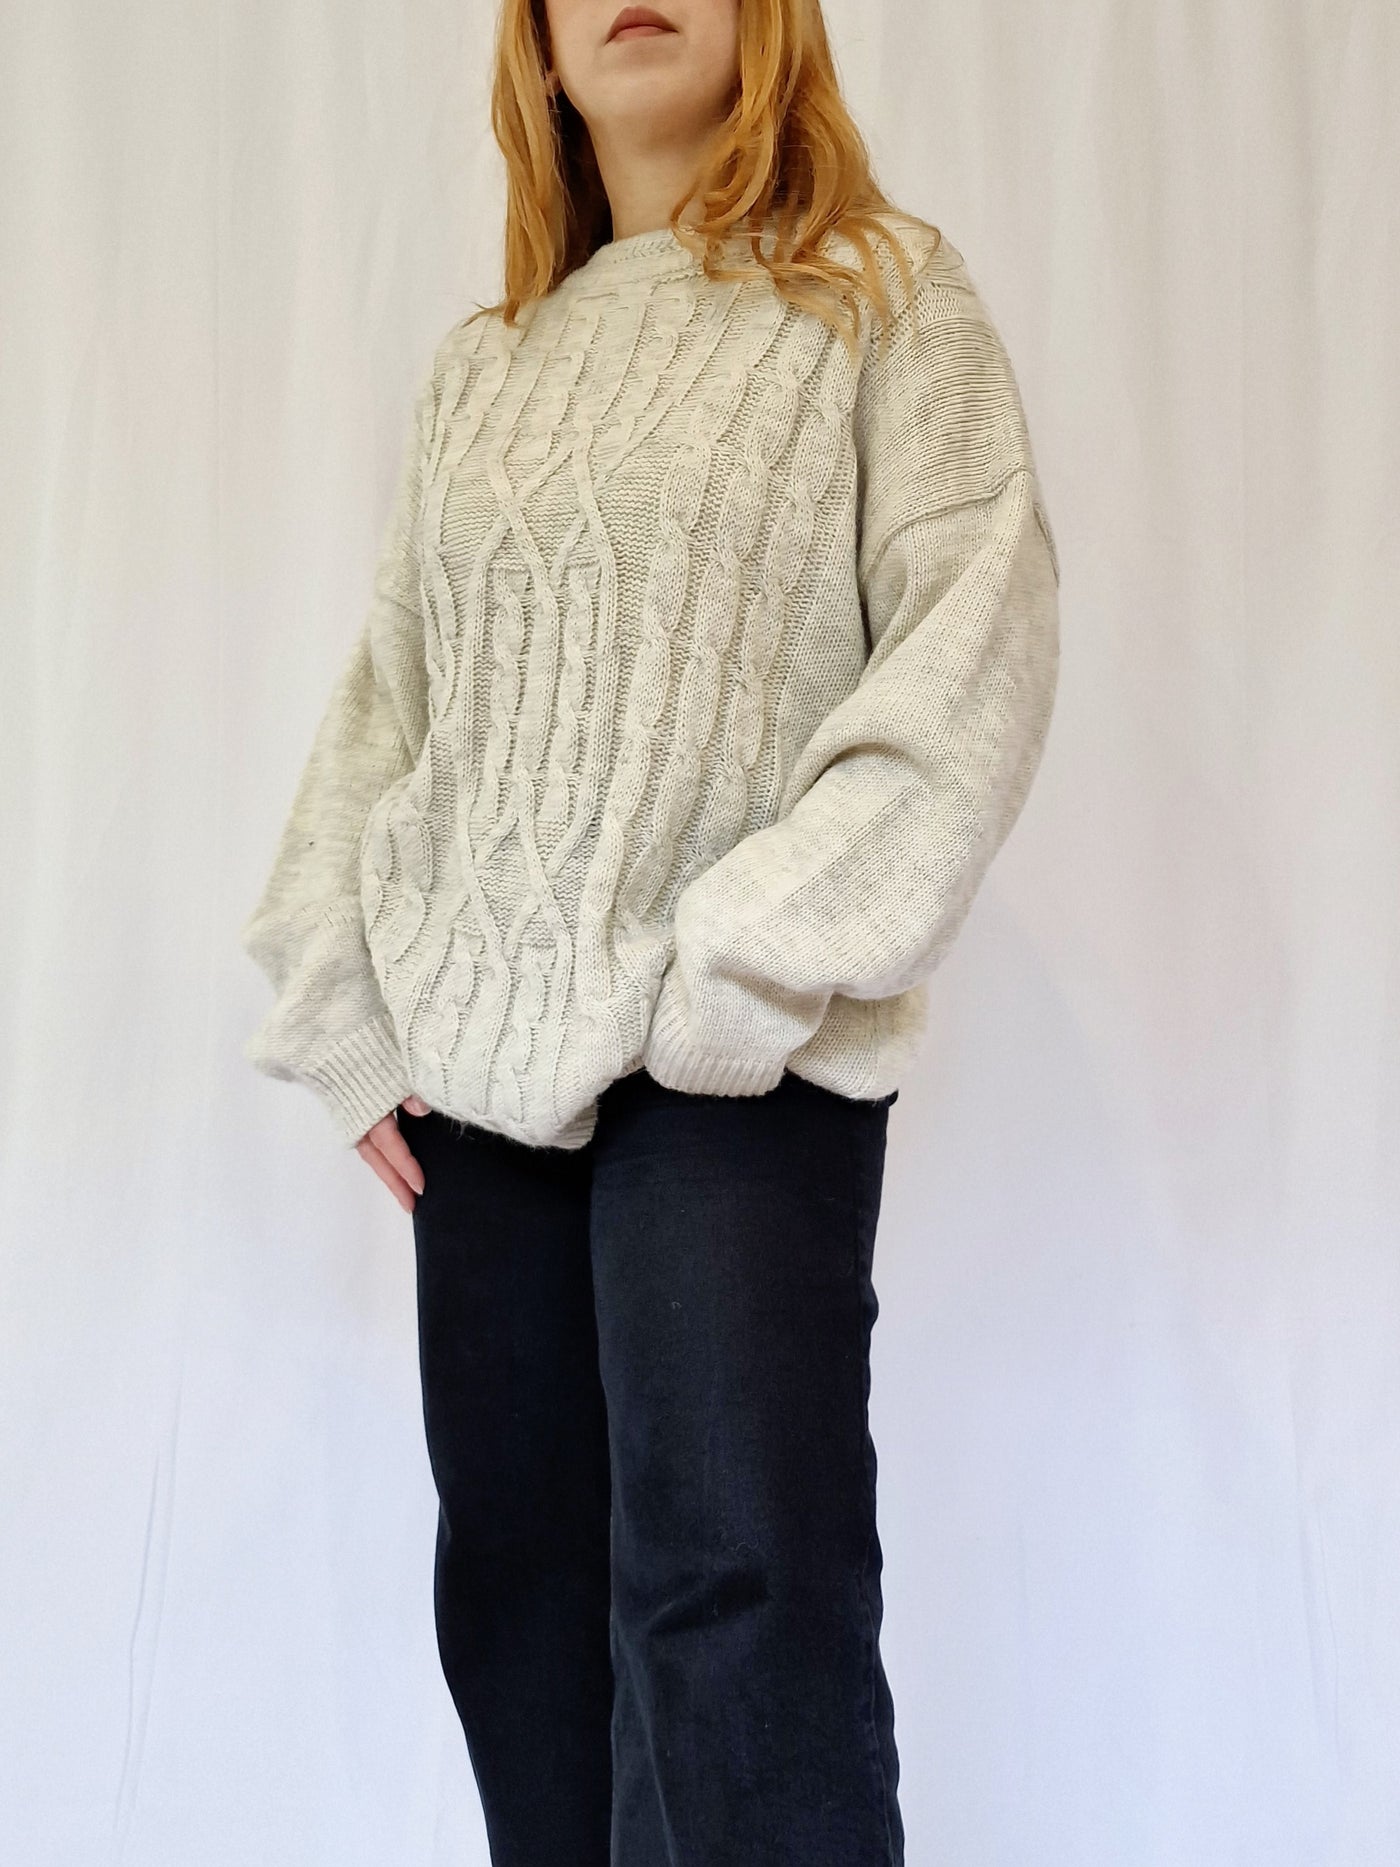 Vintage 90s Light Grey Aran Style Cable Knit Jumper with Crew Neck - XL